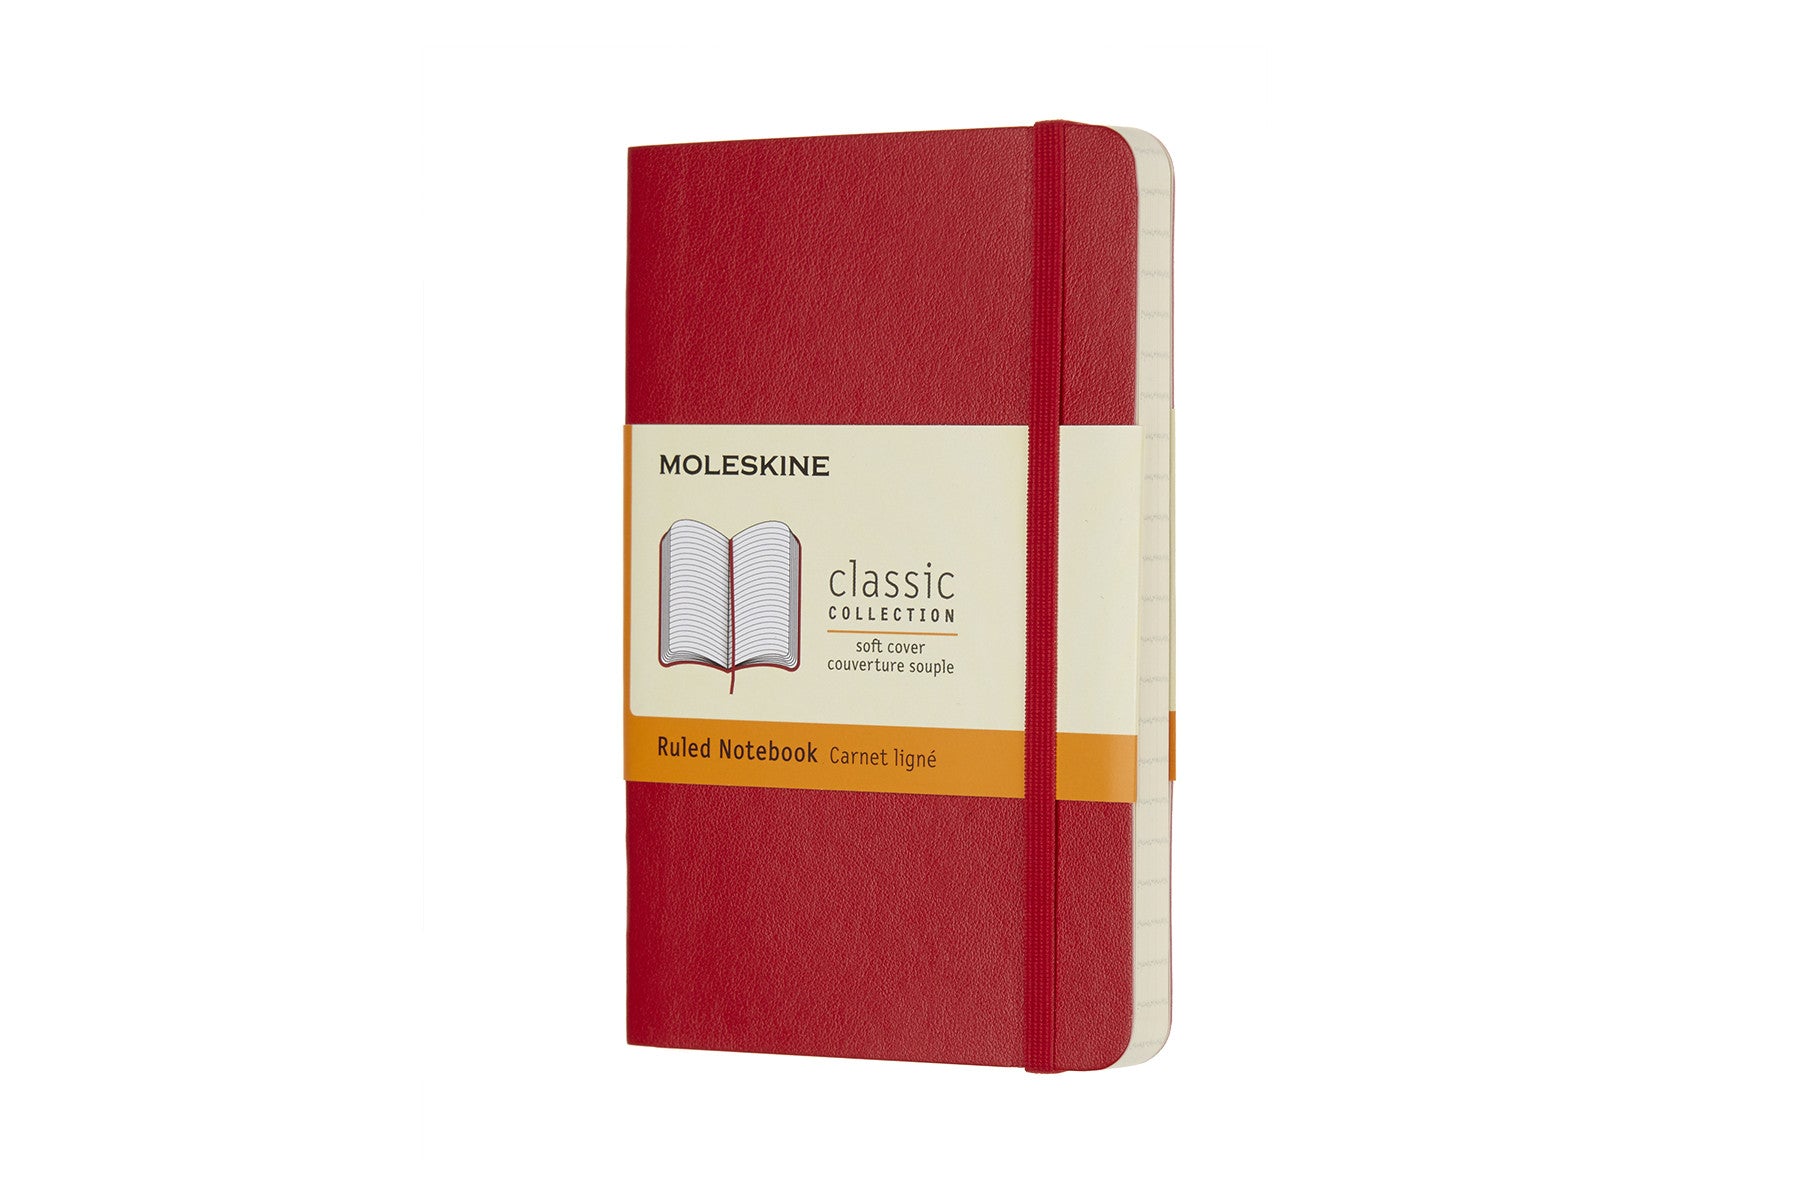 Moleskine notebook softcover pocket lined red